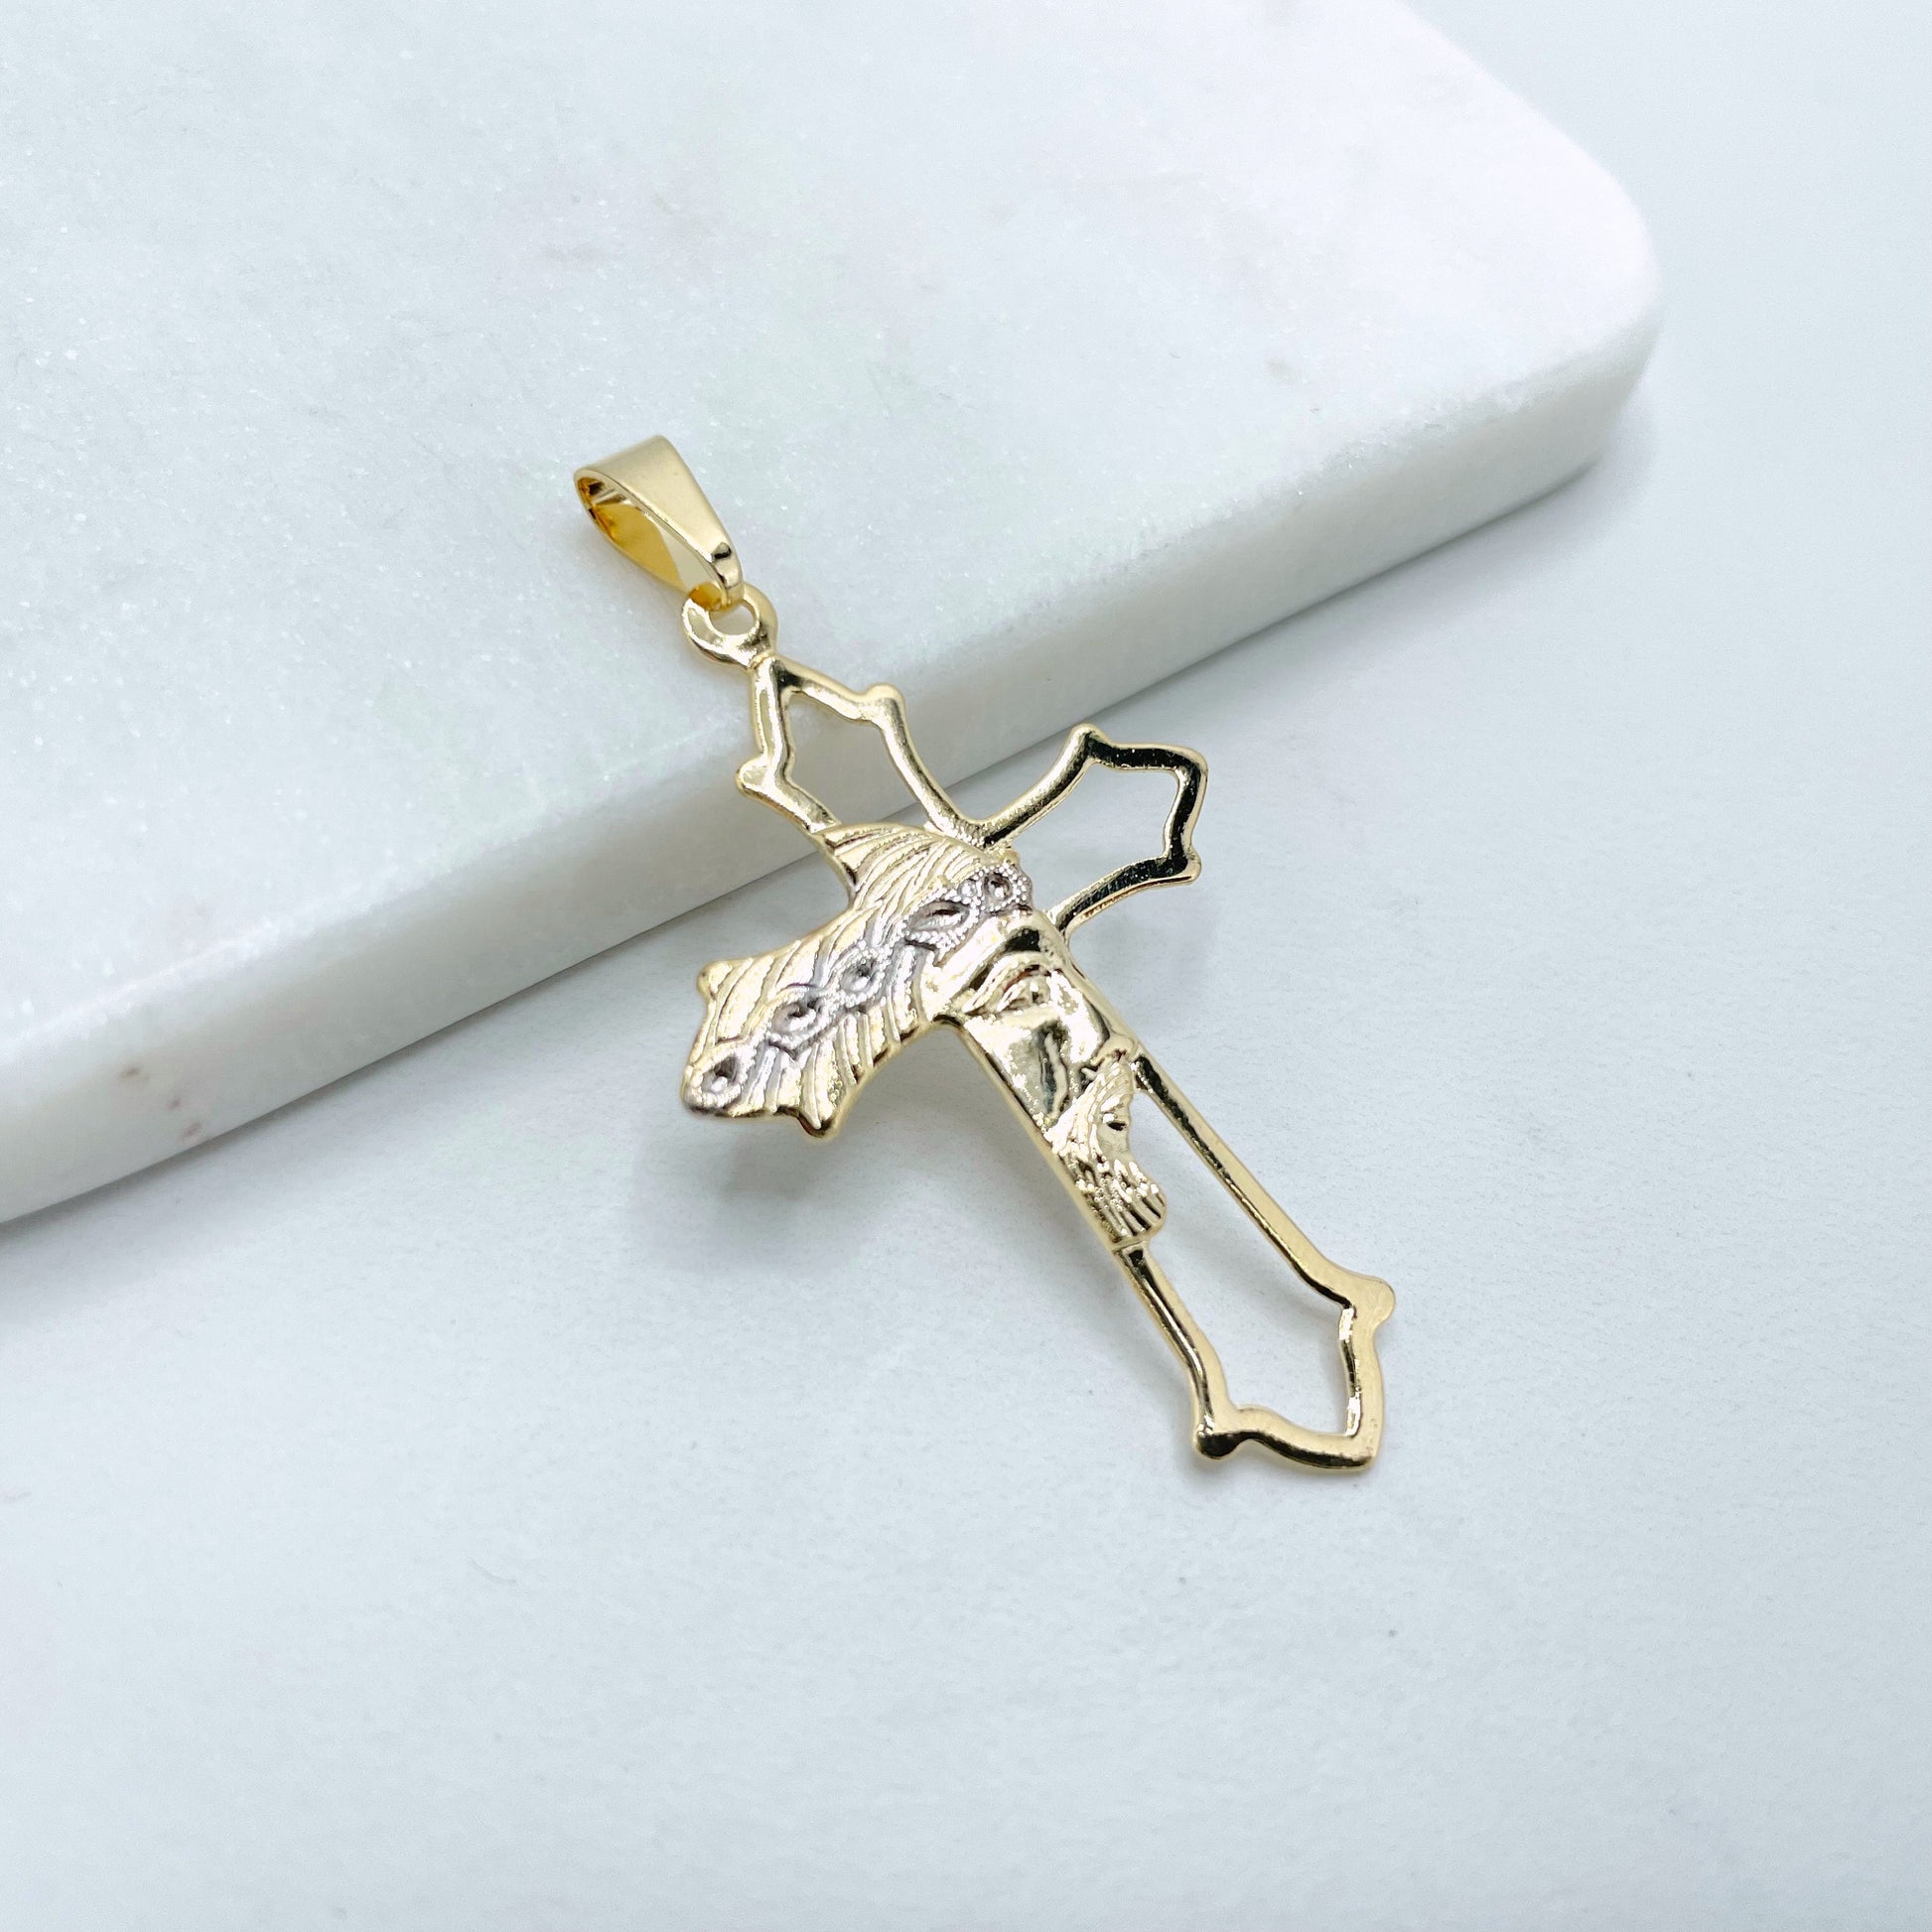 18K Gold Filled Two Tone Cross with Jesus Face Charms Pendants, Catholic Religious Holy Cross, Wholesale Jewelry Making Supplies